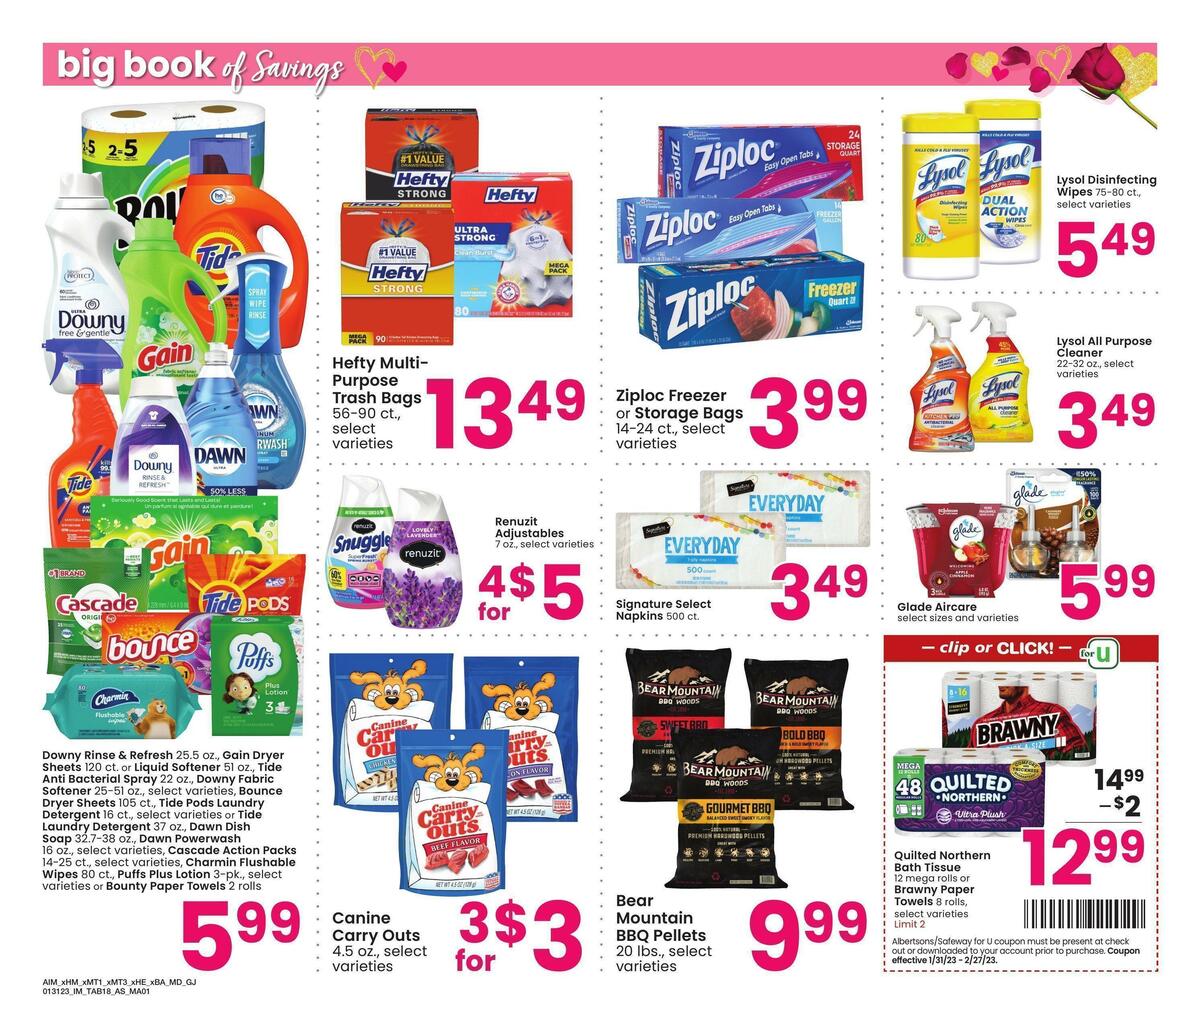 Albertsons Big Book of Savings Weekly Ad from January 31